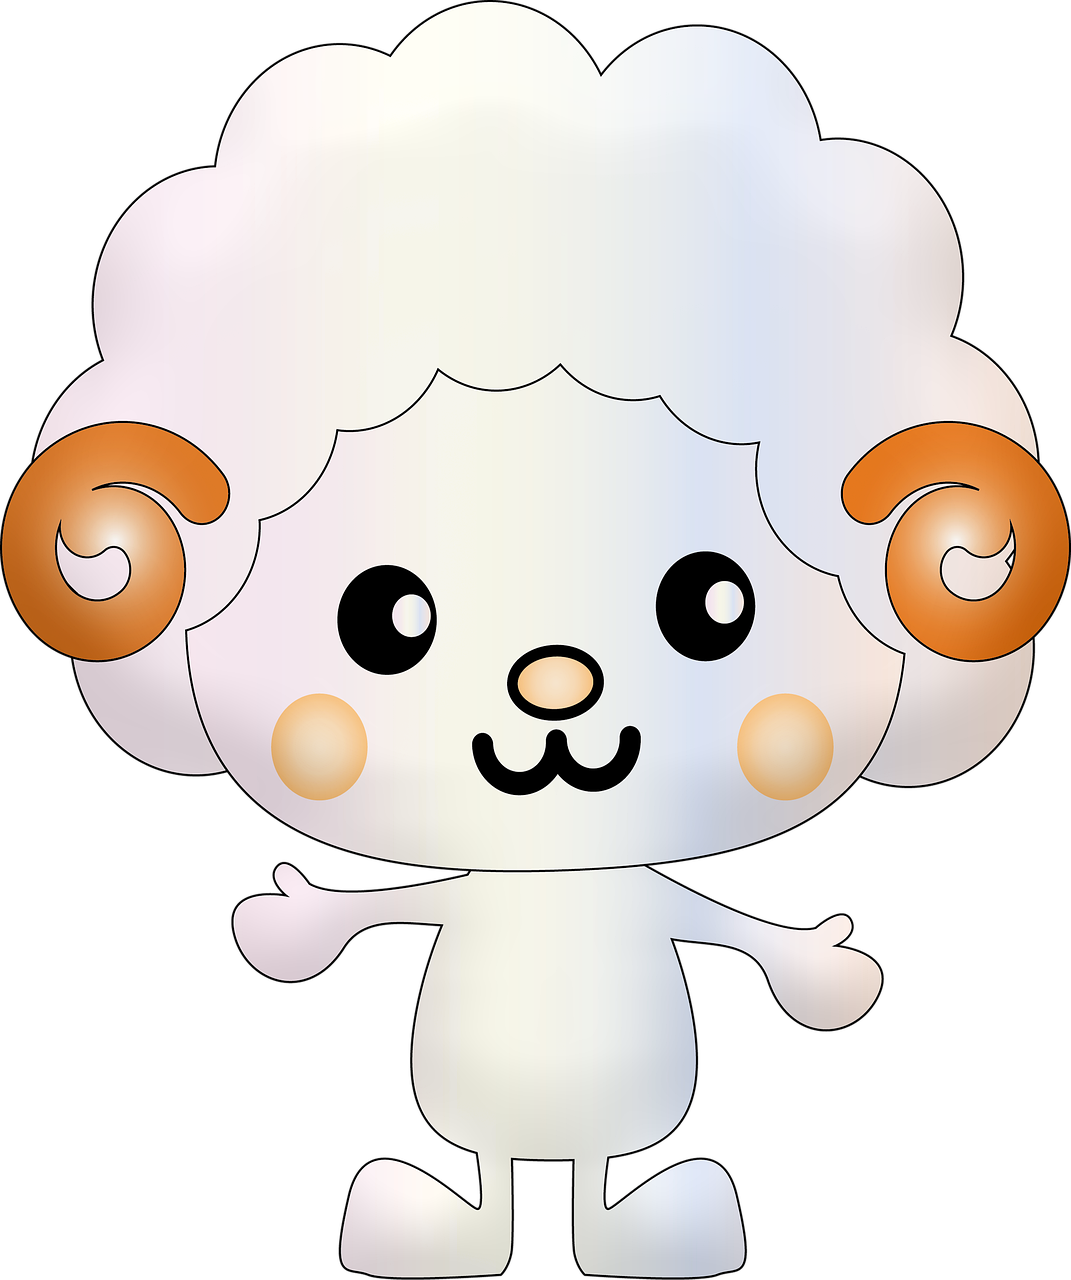 a cartoon sheep standing in front of a black background, a digital rendering, mingei, q posket, symmetric!!, smiling coy, lynchian!!!! ominious